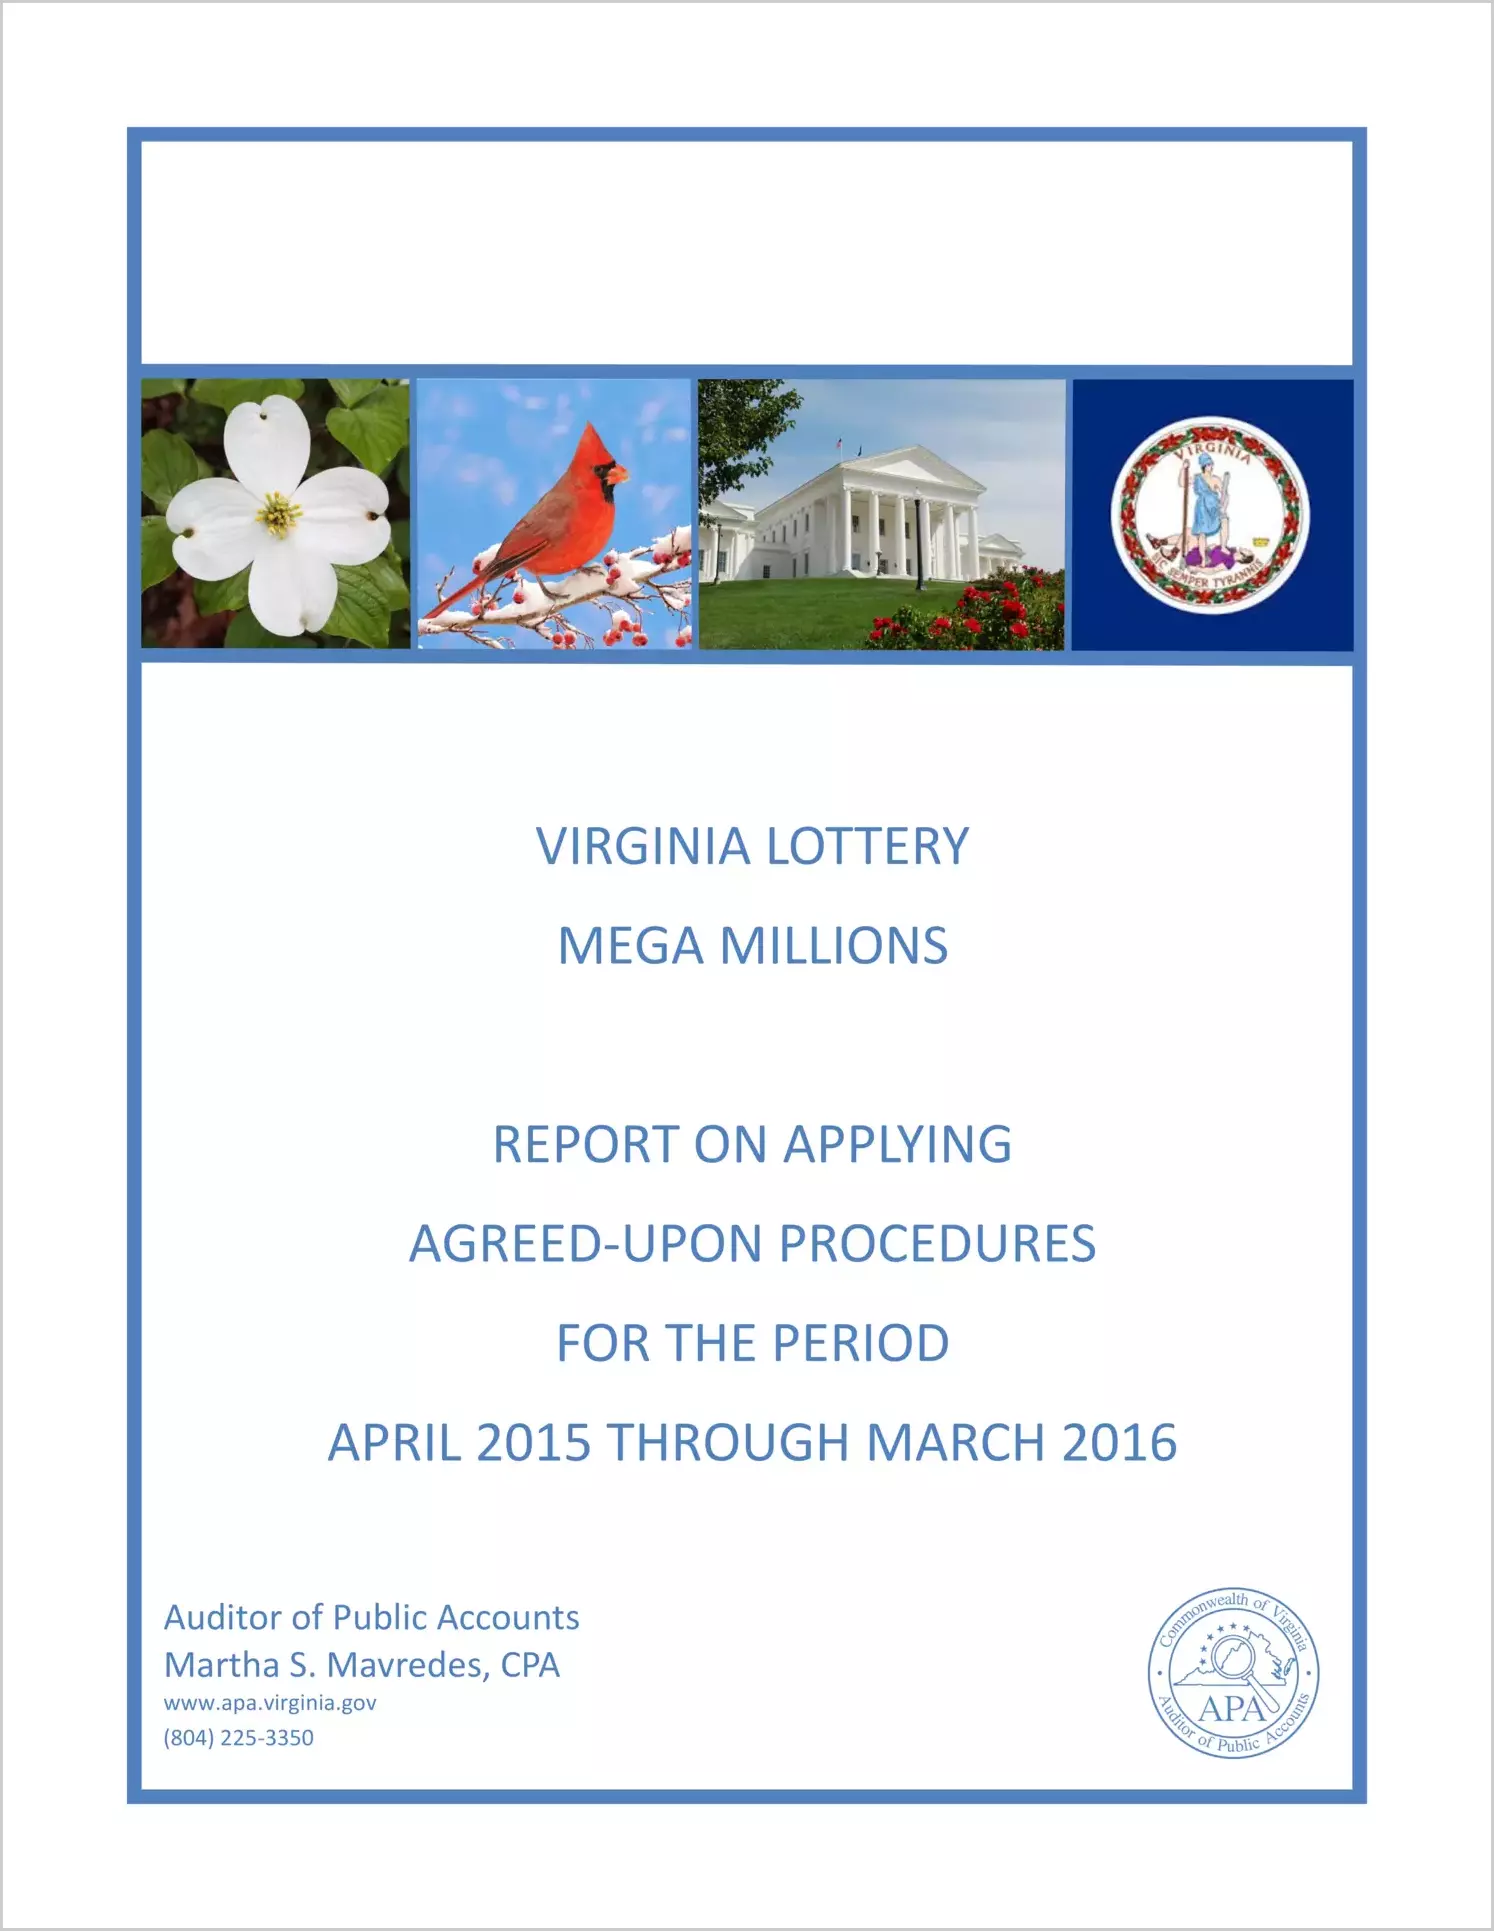 VA Lottery Mega Millions report on Applying Agreed-Upon Procedures for the period April, 2015 through March, 2016